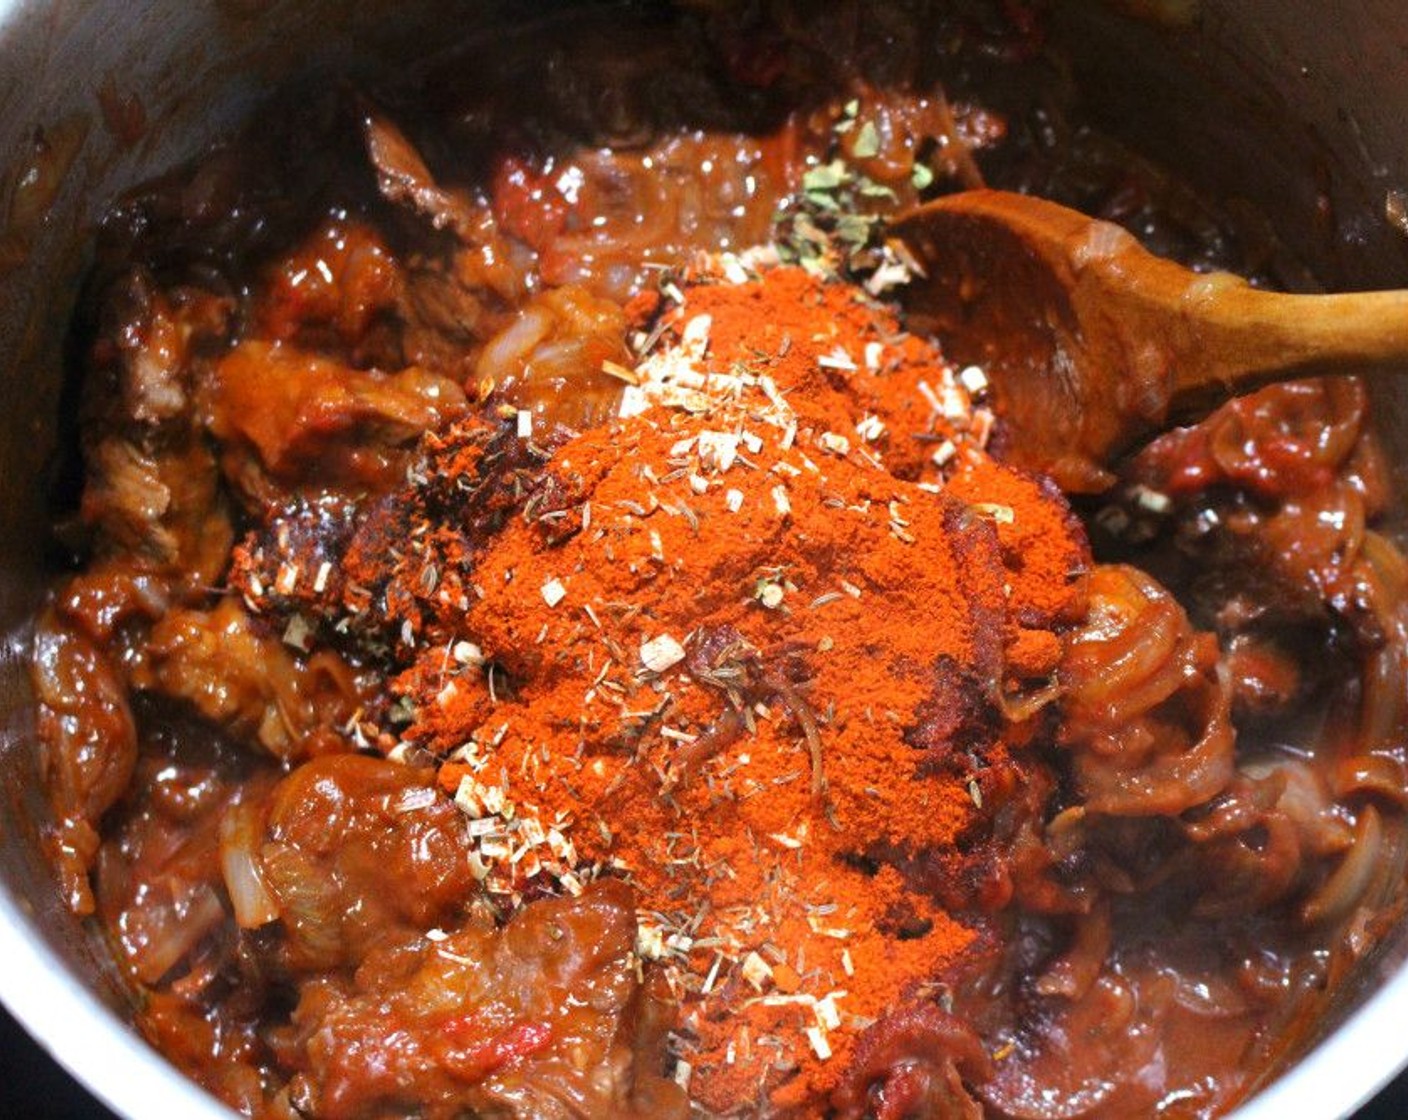 step 6 Add Hungarian Paprika (1/2 cup), Dried Red Chili Peppers (4), Ground Sichuan Pepper (2 Tbsp), Oyster Sauce (2 Tbsp), Lemongrass (2 Tbsp), Dried Oregano (1 tsp), Dried Thyme (1 tsp), Cayenne Pepper (to taste) and Kosher Salt (to taste) to the meat.